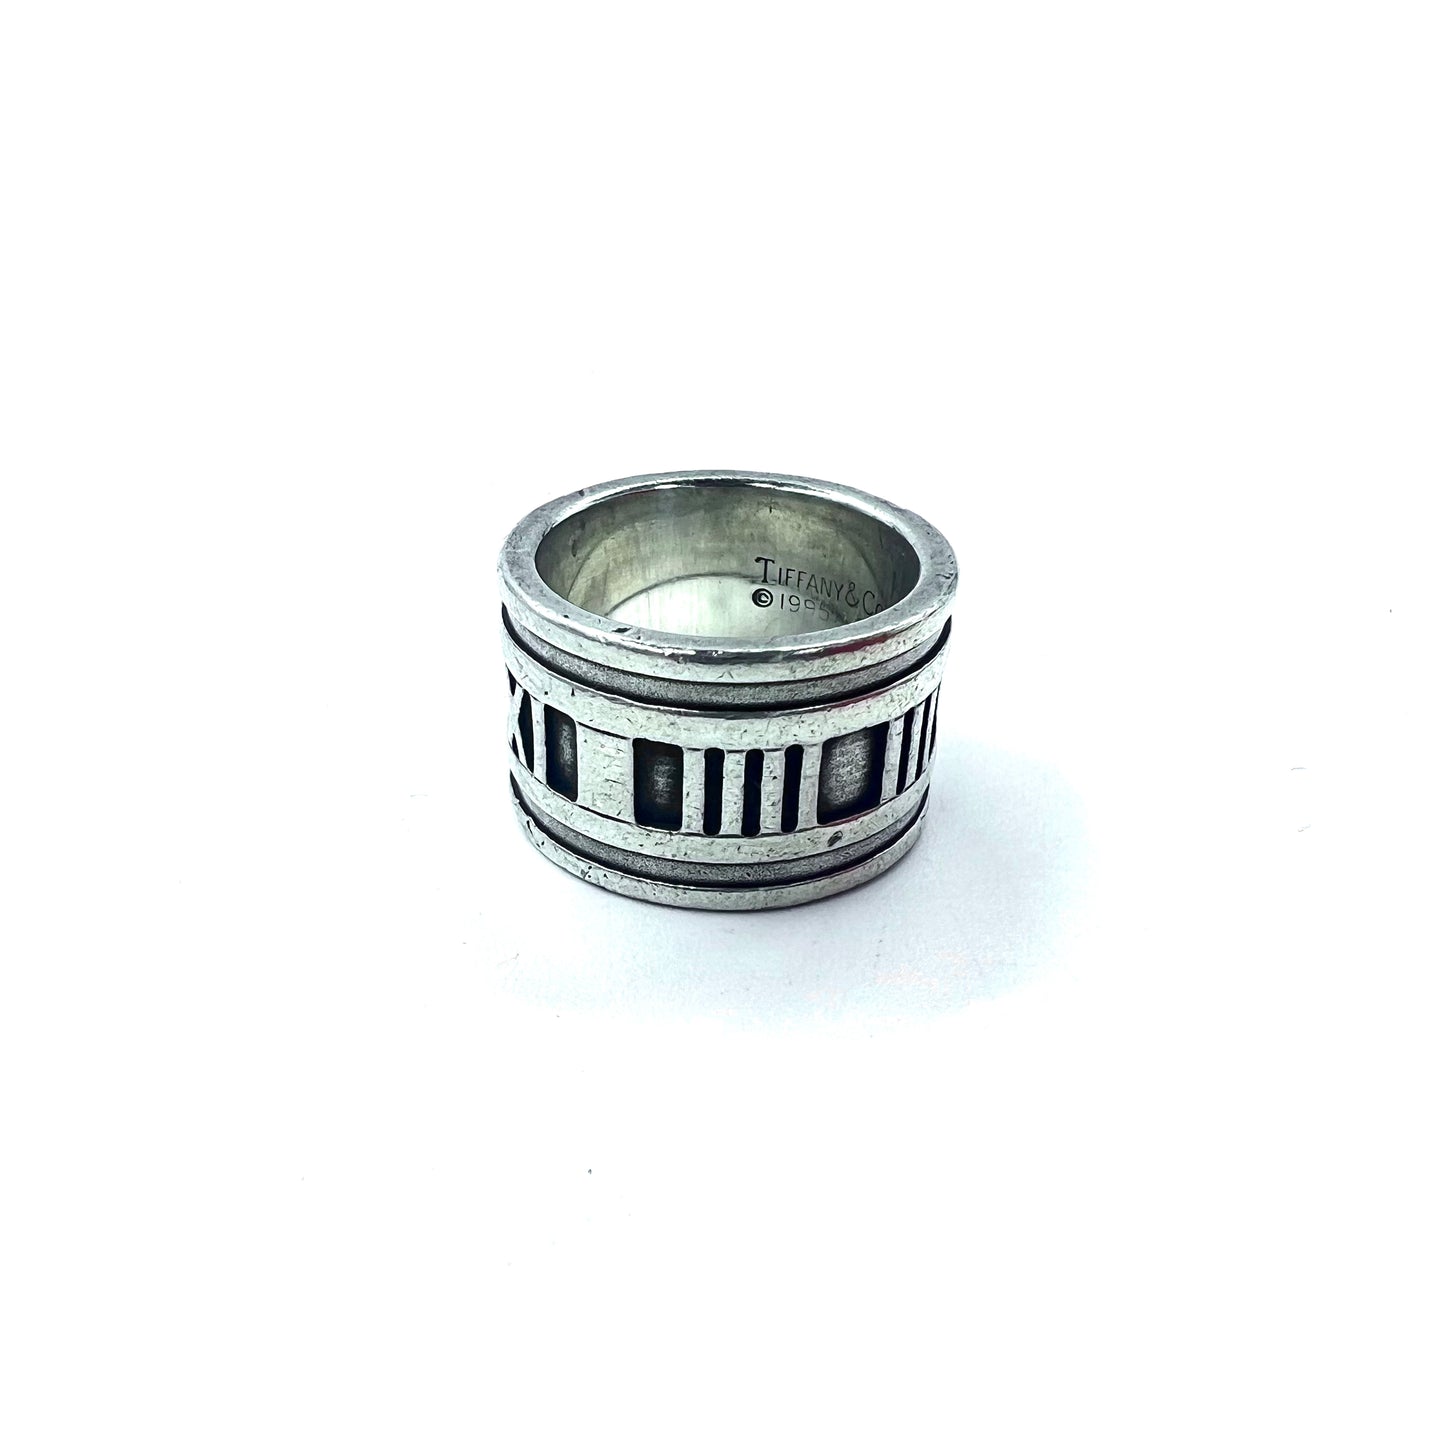 TIFFANY & CO. Atlas wide ring ring No. 9 Silver Silver 925 Pinky ...